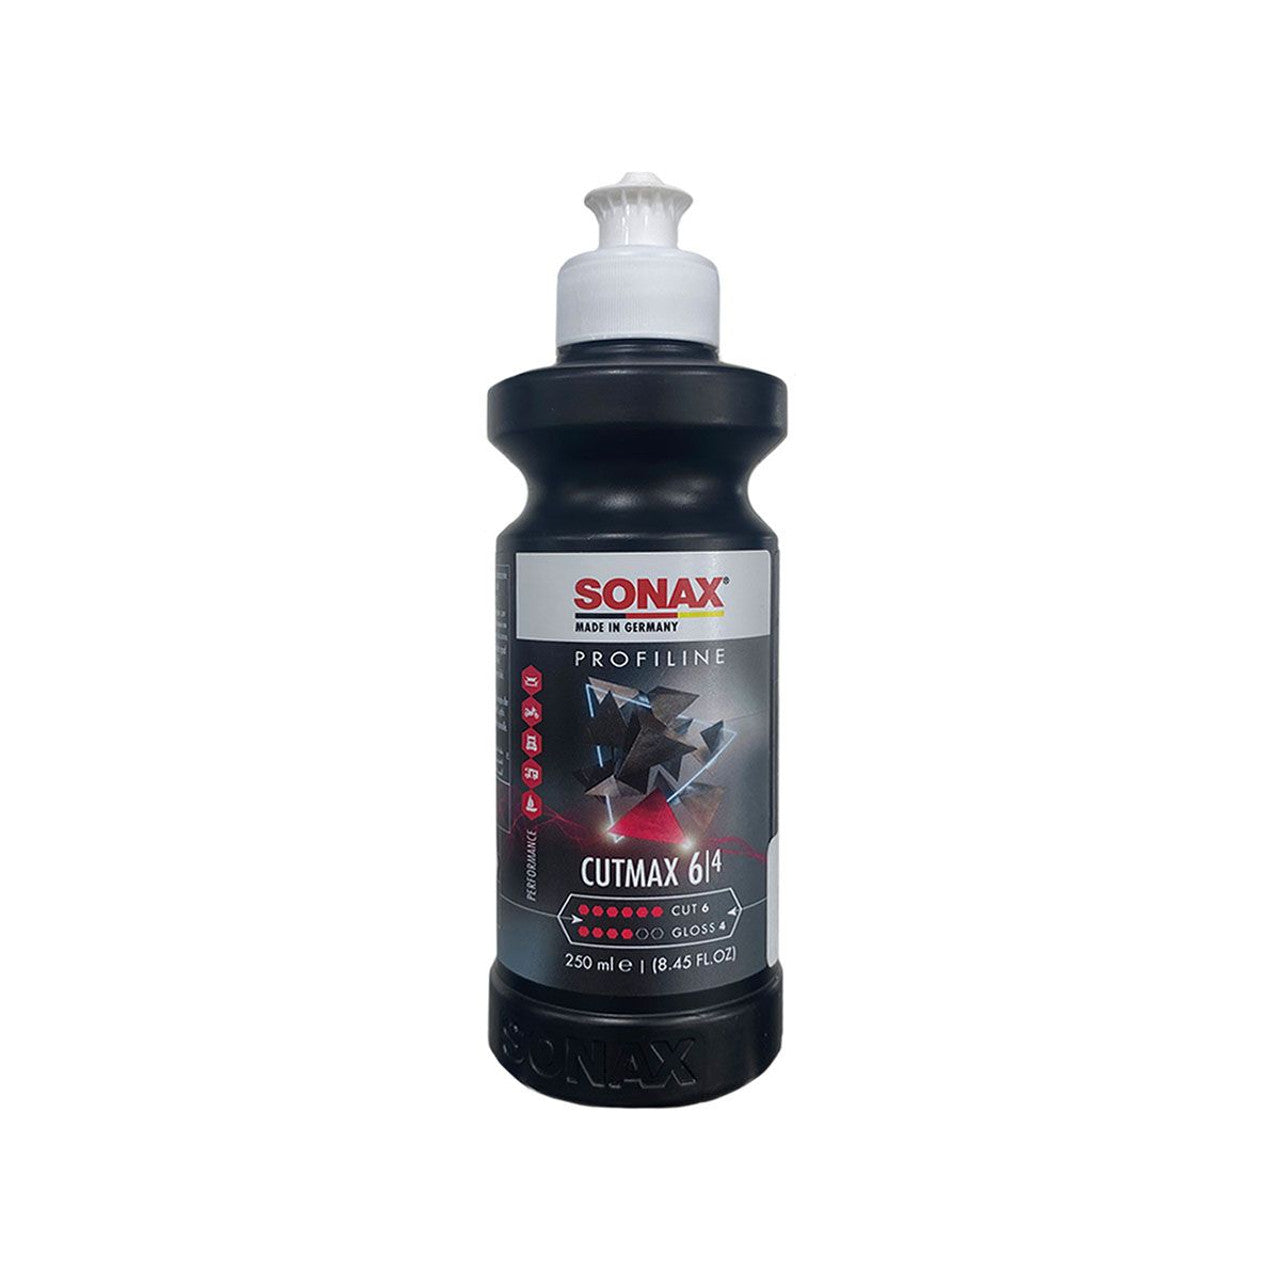 Sonax CutMax Cutting Compound - 250ml - Sierra Madre Collection